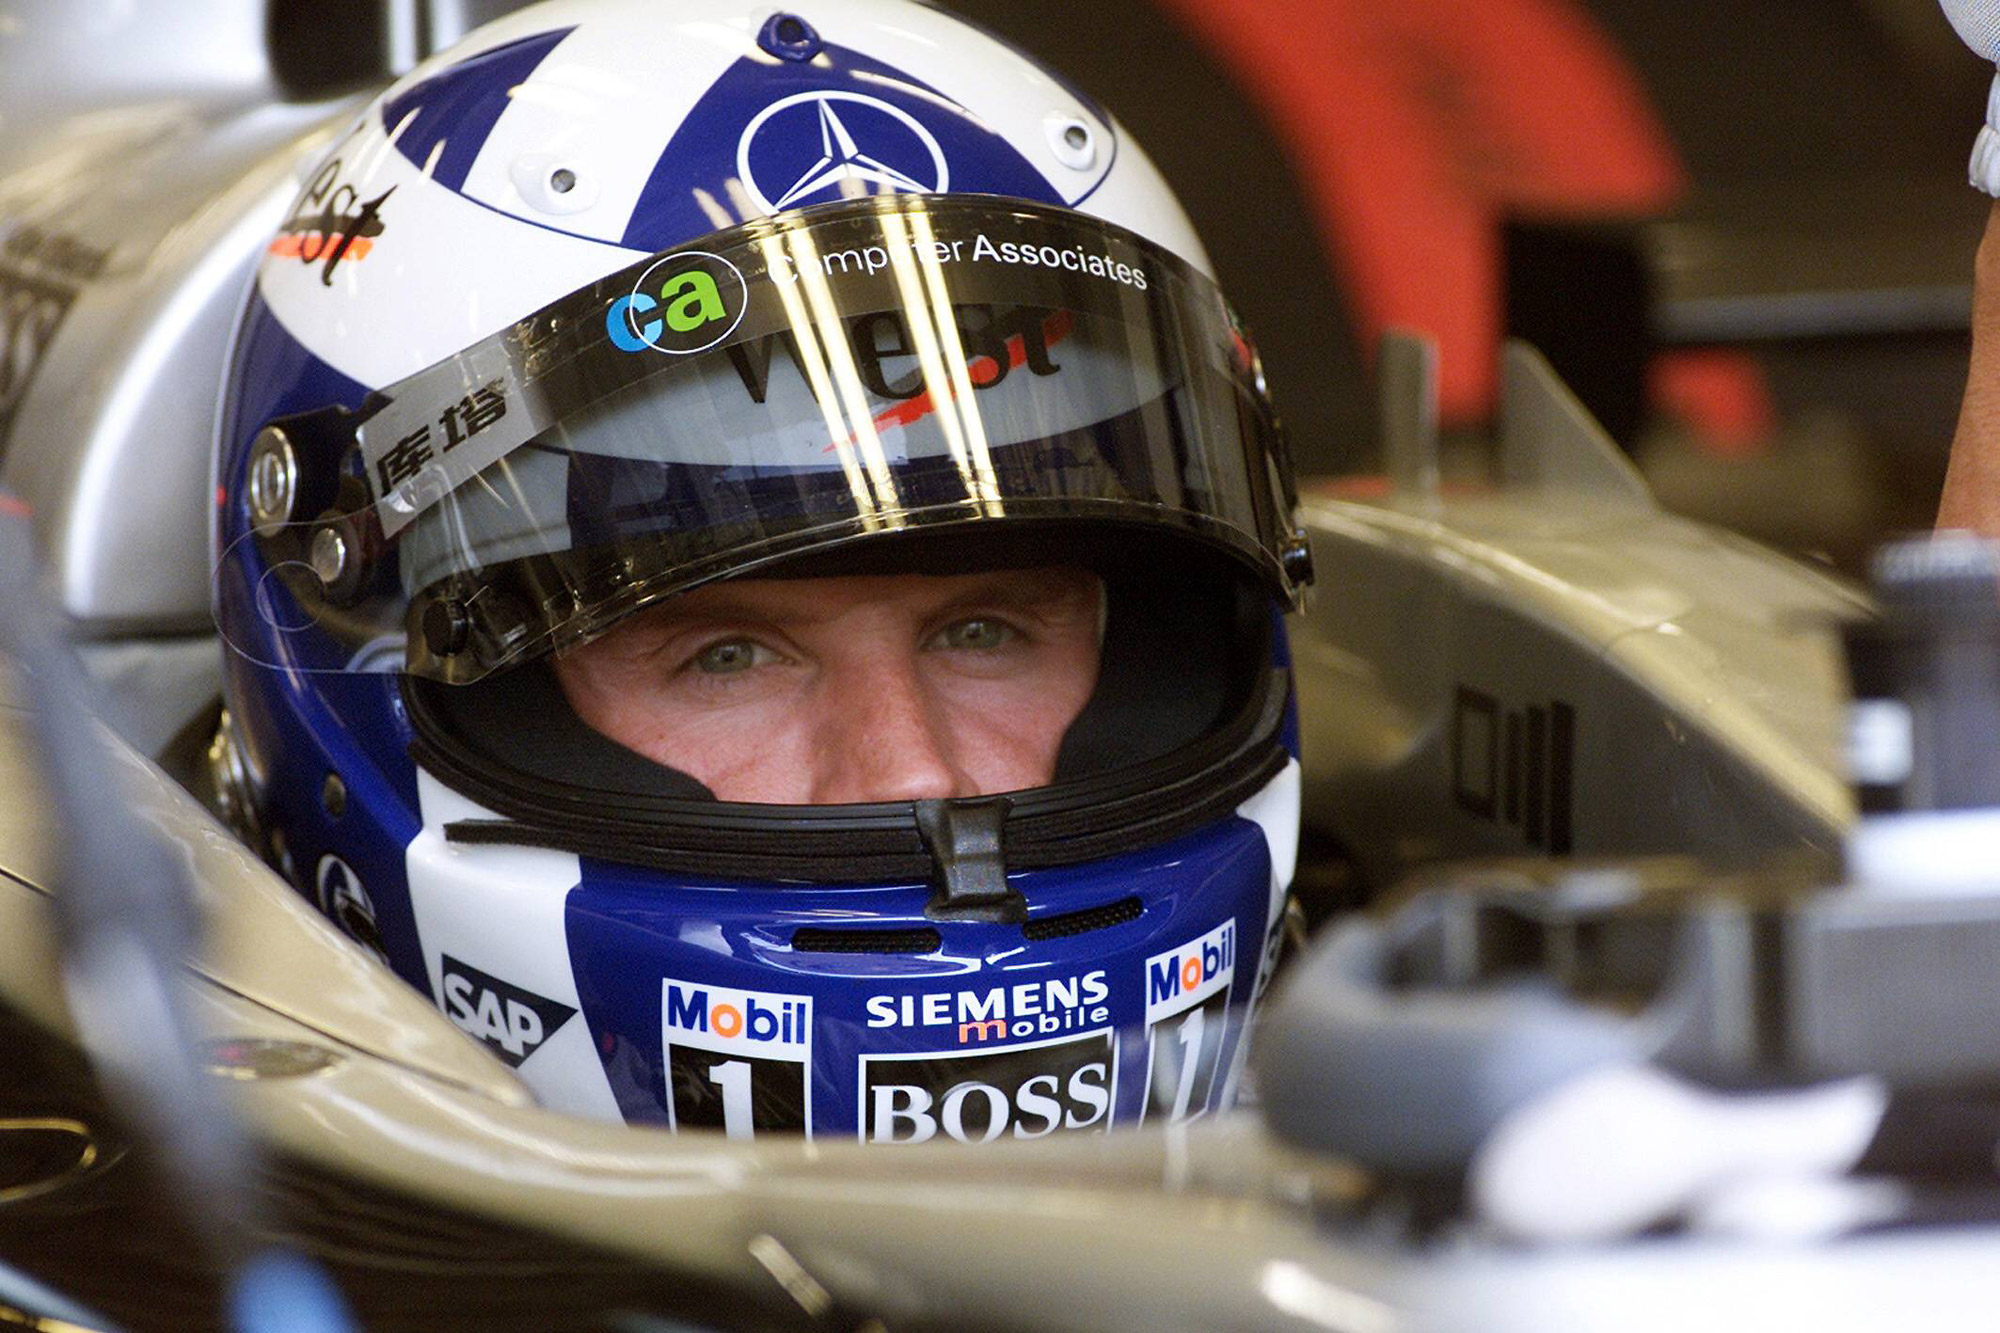 David Coulthard wearing a blue helmet with Saltire cross